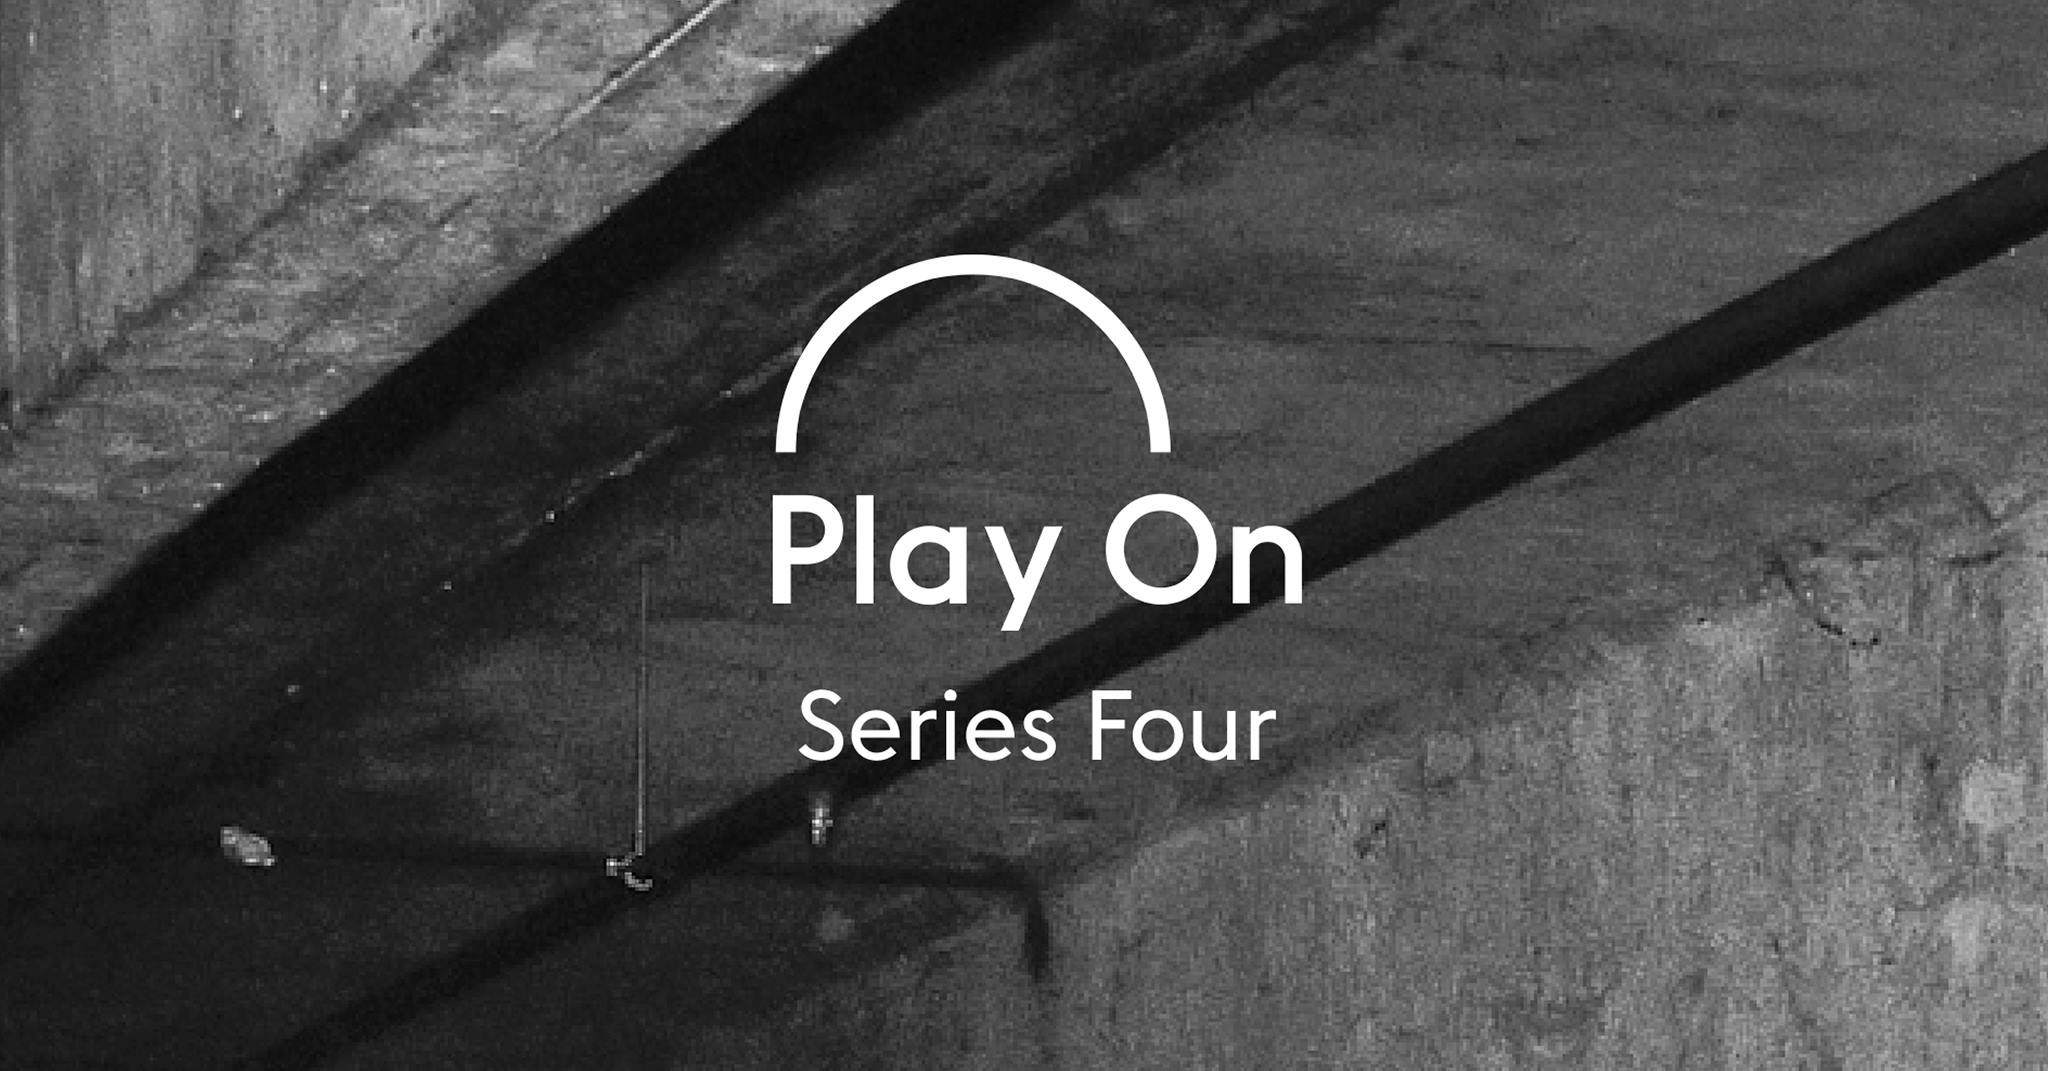 Play On Series Four v_1: Beethoven + Mustonen / Noise In My Head - Página frontal